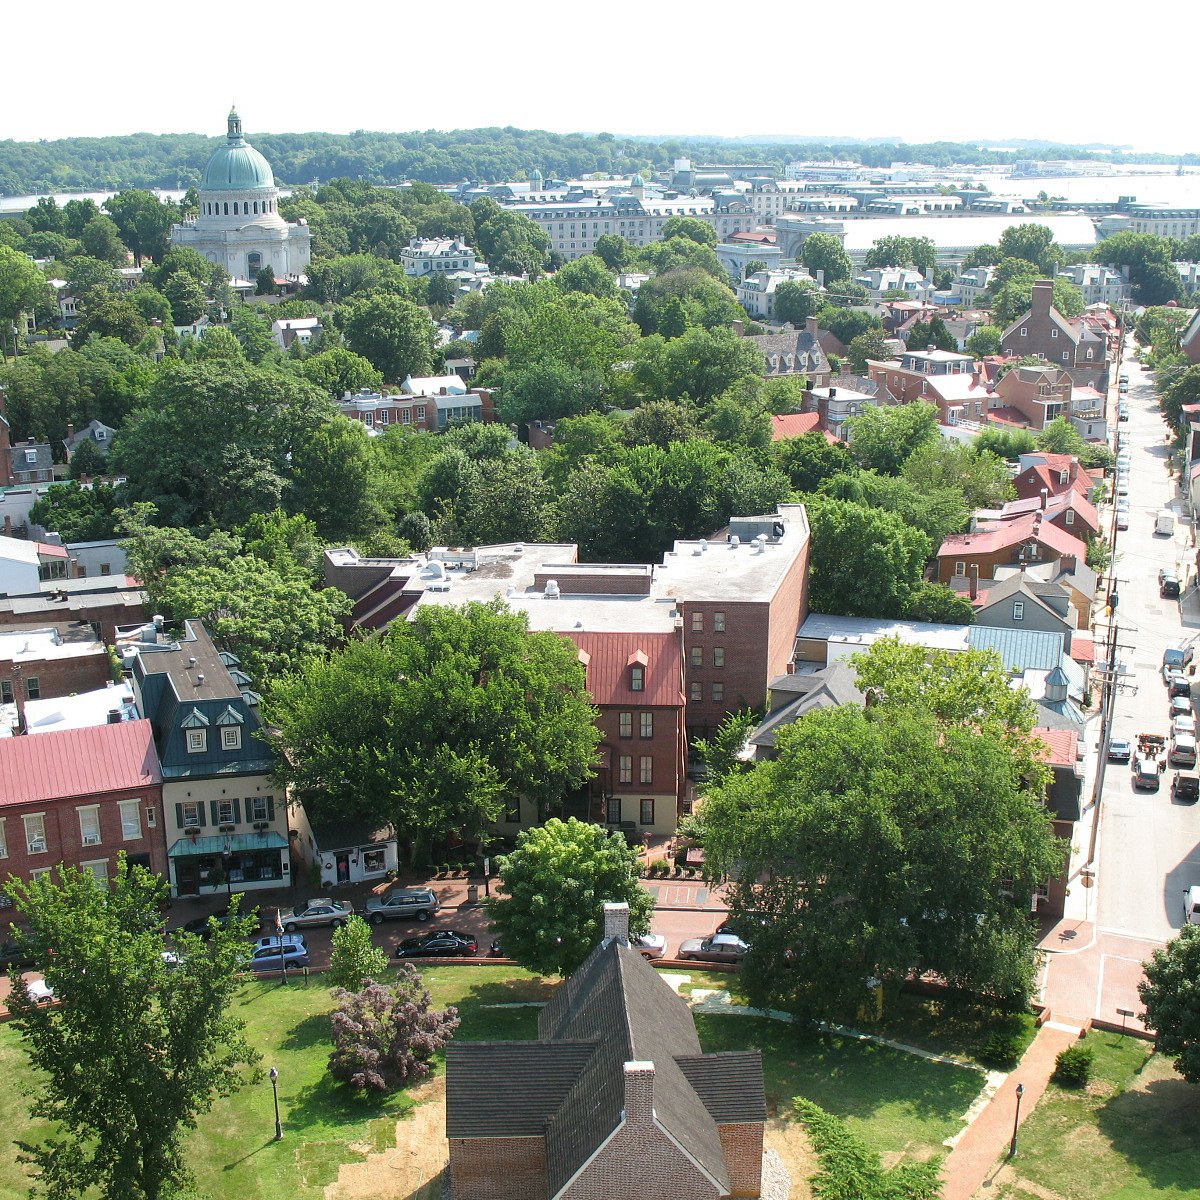 Annapolis Historic District 2021 All You Need to Know BEFORE You Go